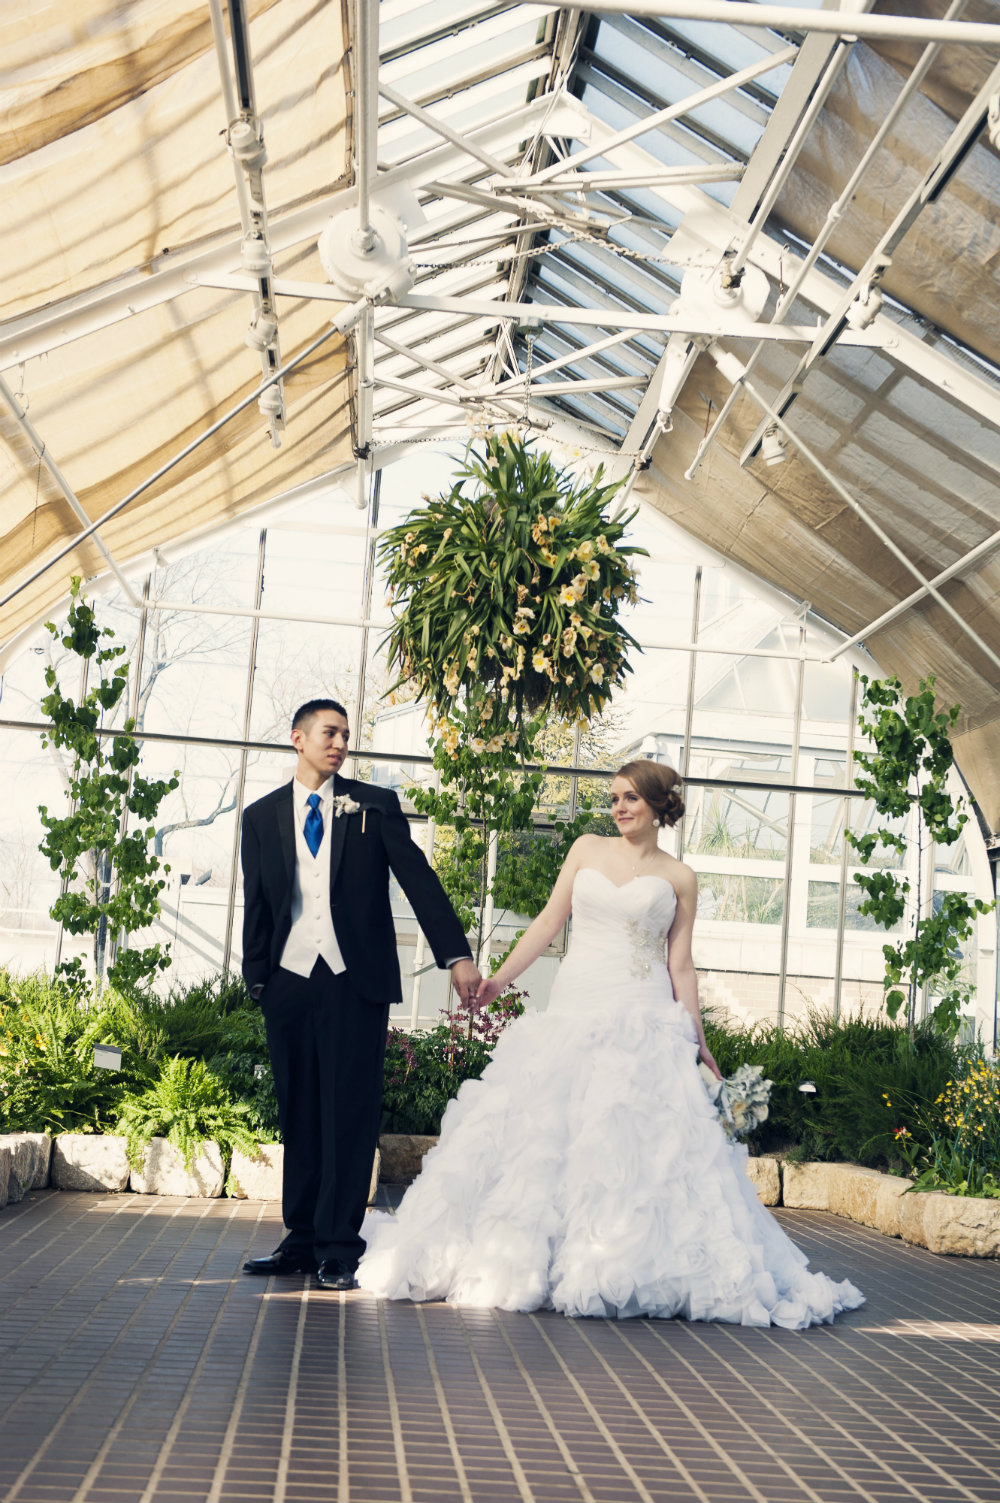 Rachel & Elias share moments in Columbus OH at wedding at Franklin Park Conservatory